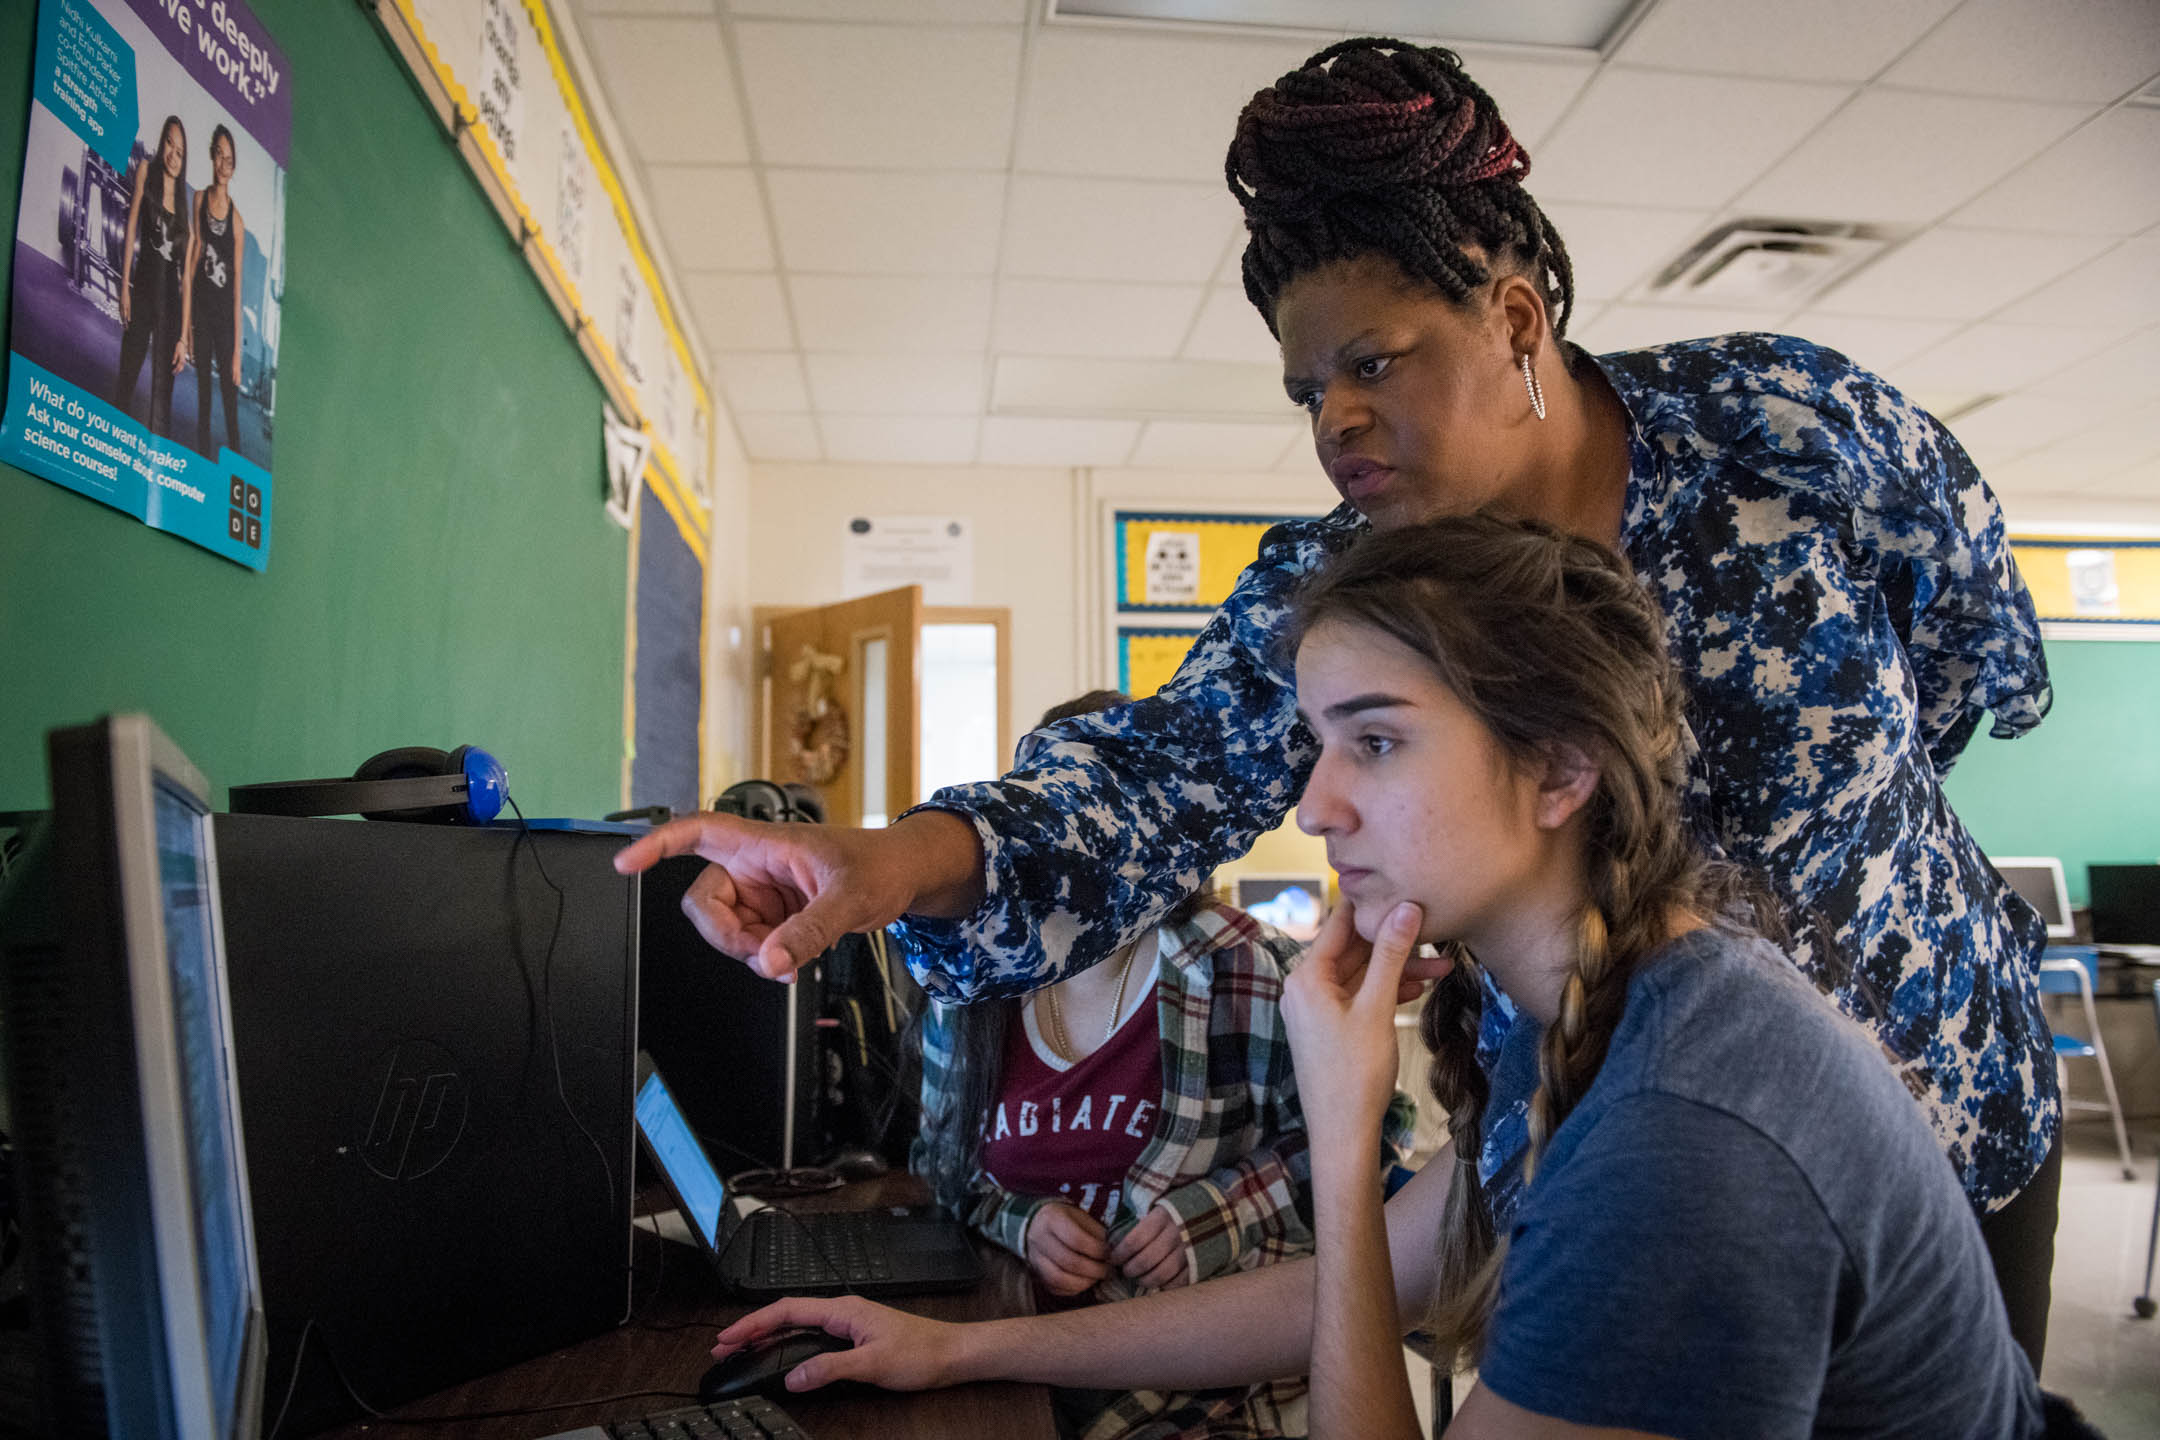 Teacher Aneesah Nu'Man, right, works with Yennifer Coca during her AP Computer Science Principles class at Iroquois High School (Jefferson County). Nu’Man is one of more than 100 teachers across the state now teaching computer science thanks to the computer science initiative, which includes a professional learning component aimed at training computer science teachers. Photo by Bobby Ellis, April 23, 2018